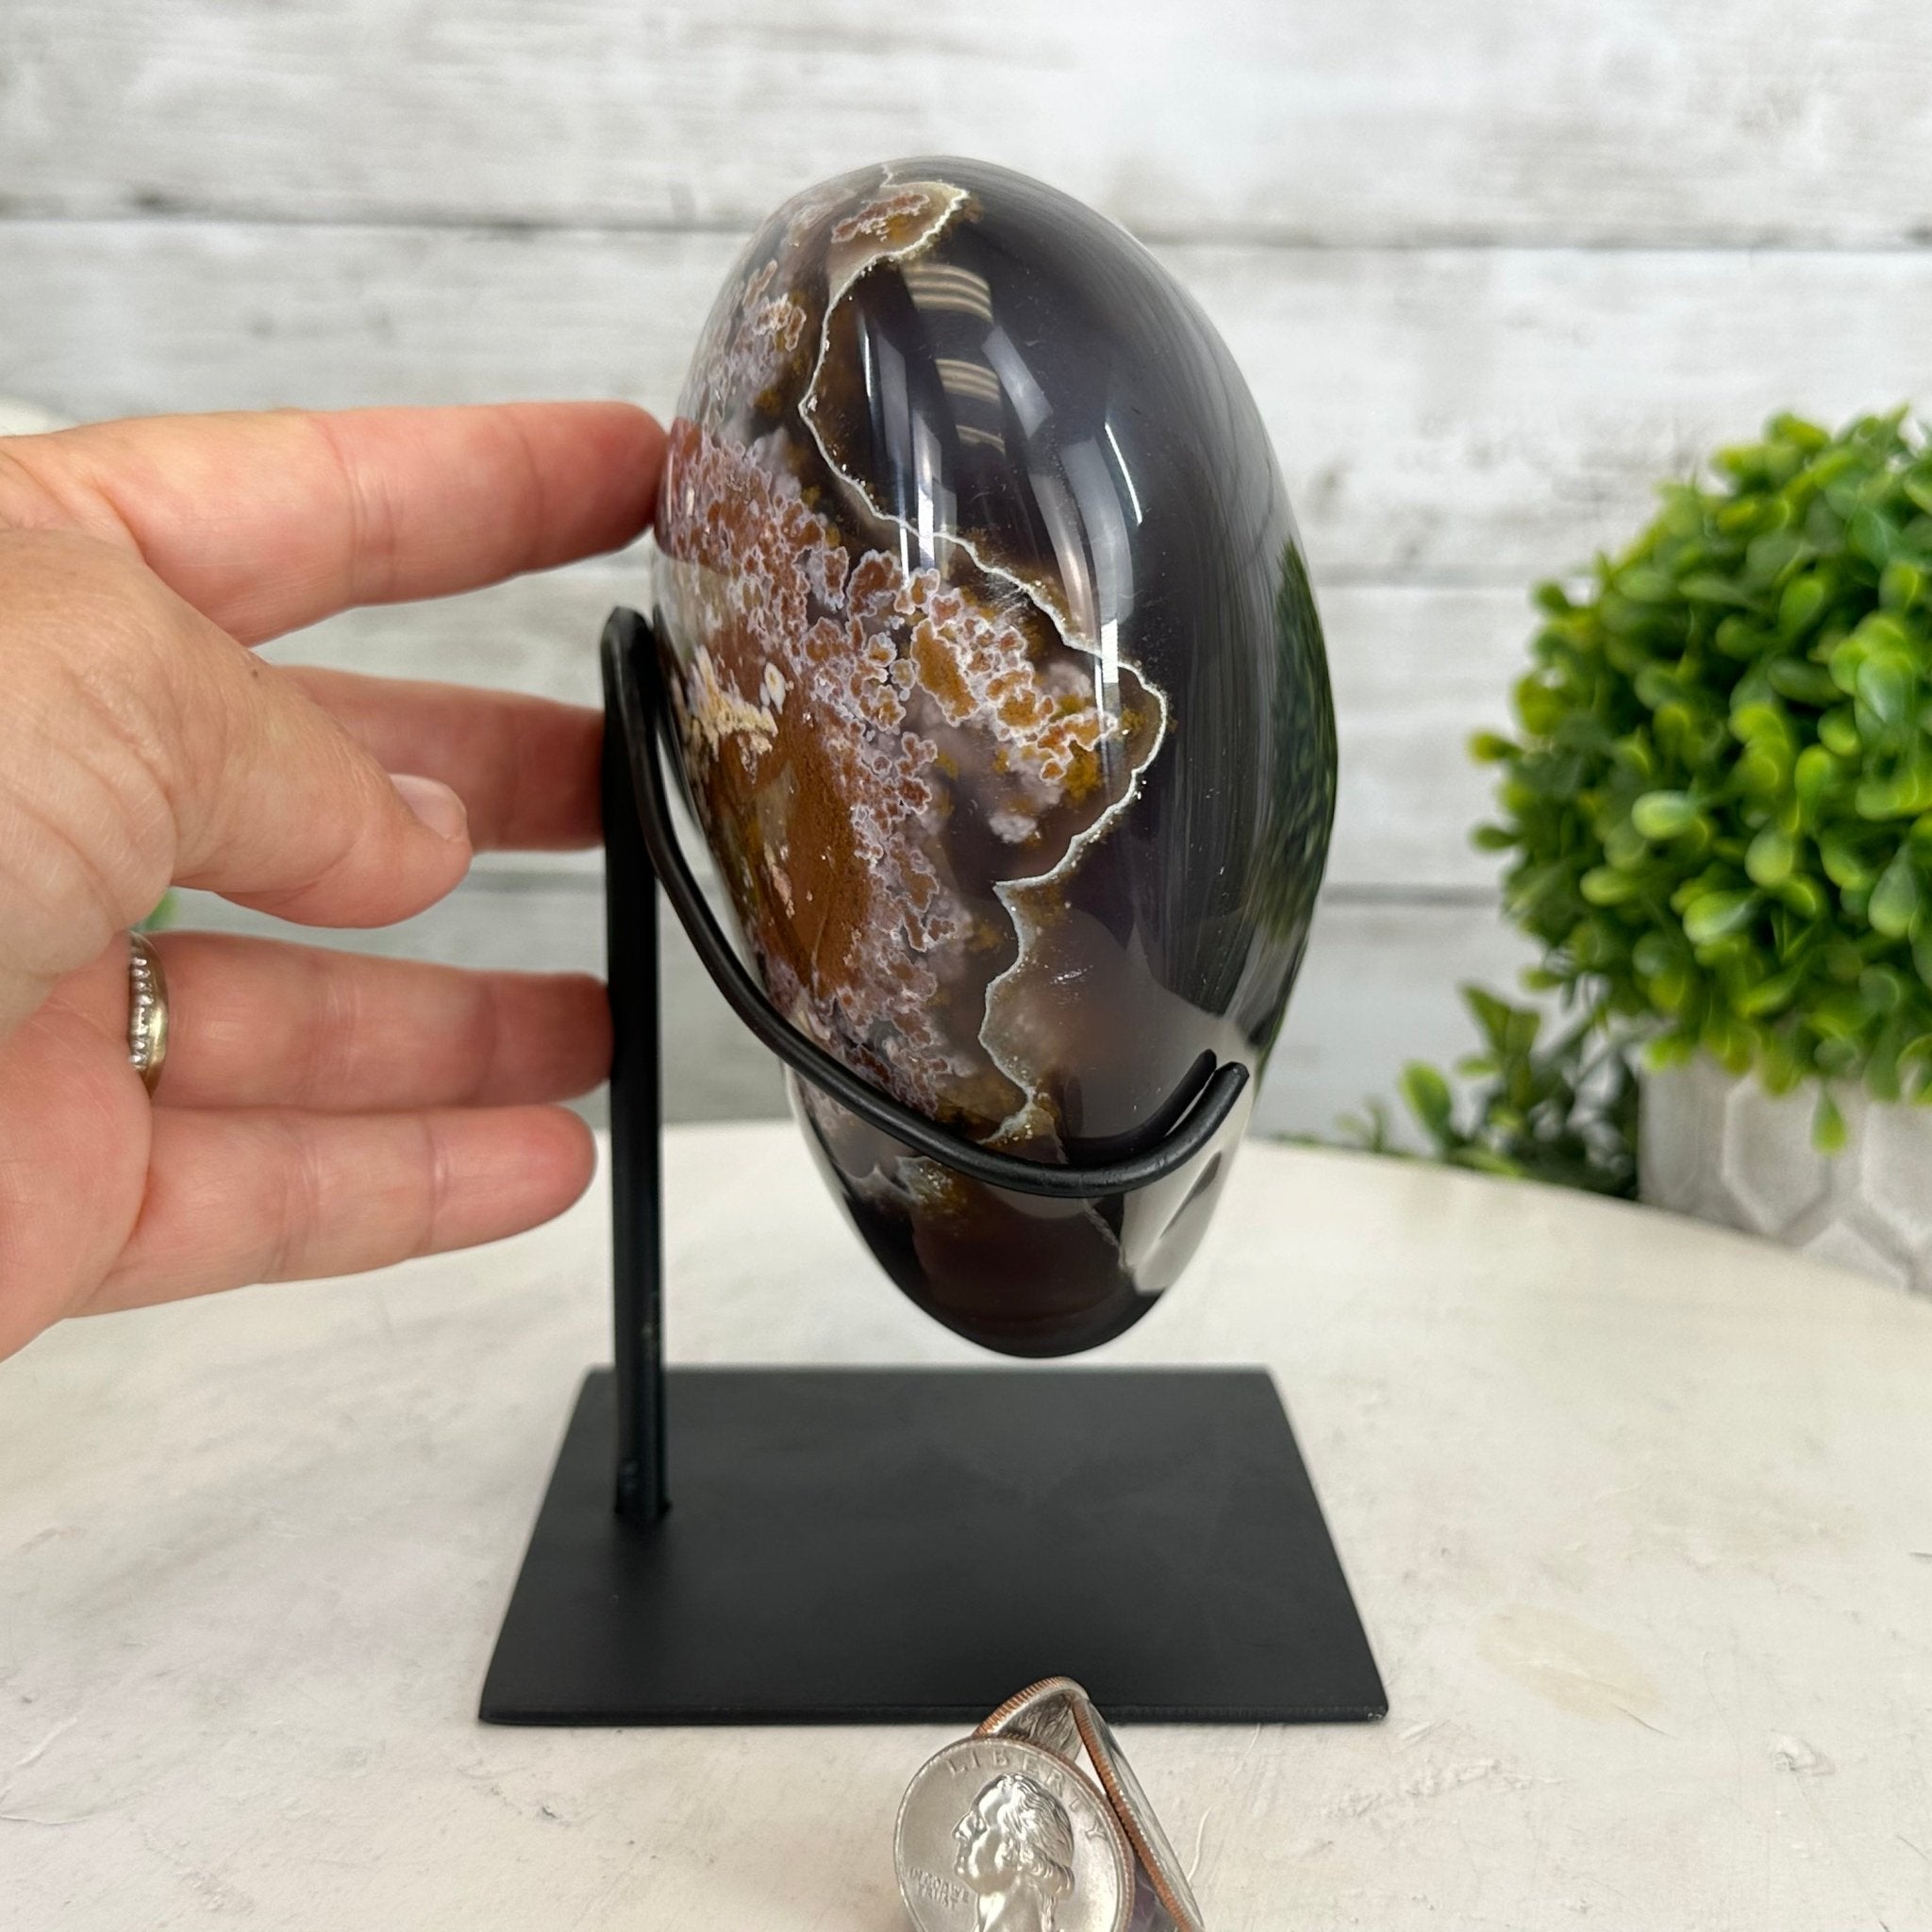 Polished Agate Heart-Shaped Geode on a Metal Stand, 5.4 lbs & 6.75" Tall, Model #5468-0014 by Brazil Gems - Brazil GemsBrazil GemsPolished Agate Heart-Shaped Geode on a Metal Stand, 5.4 lbs & 6.75" Tall, Model #5468-0014 by Brazil GemsHearts5468-0014